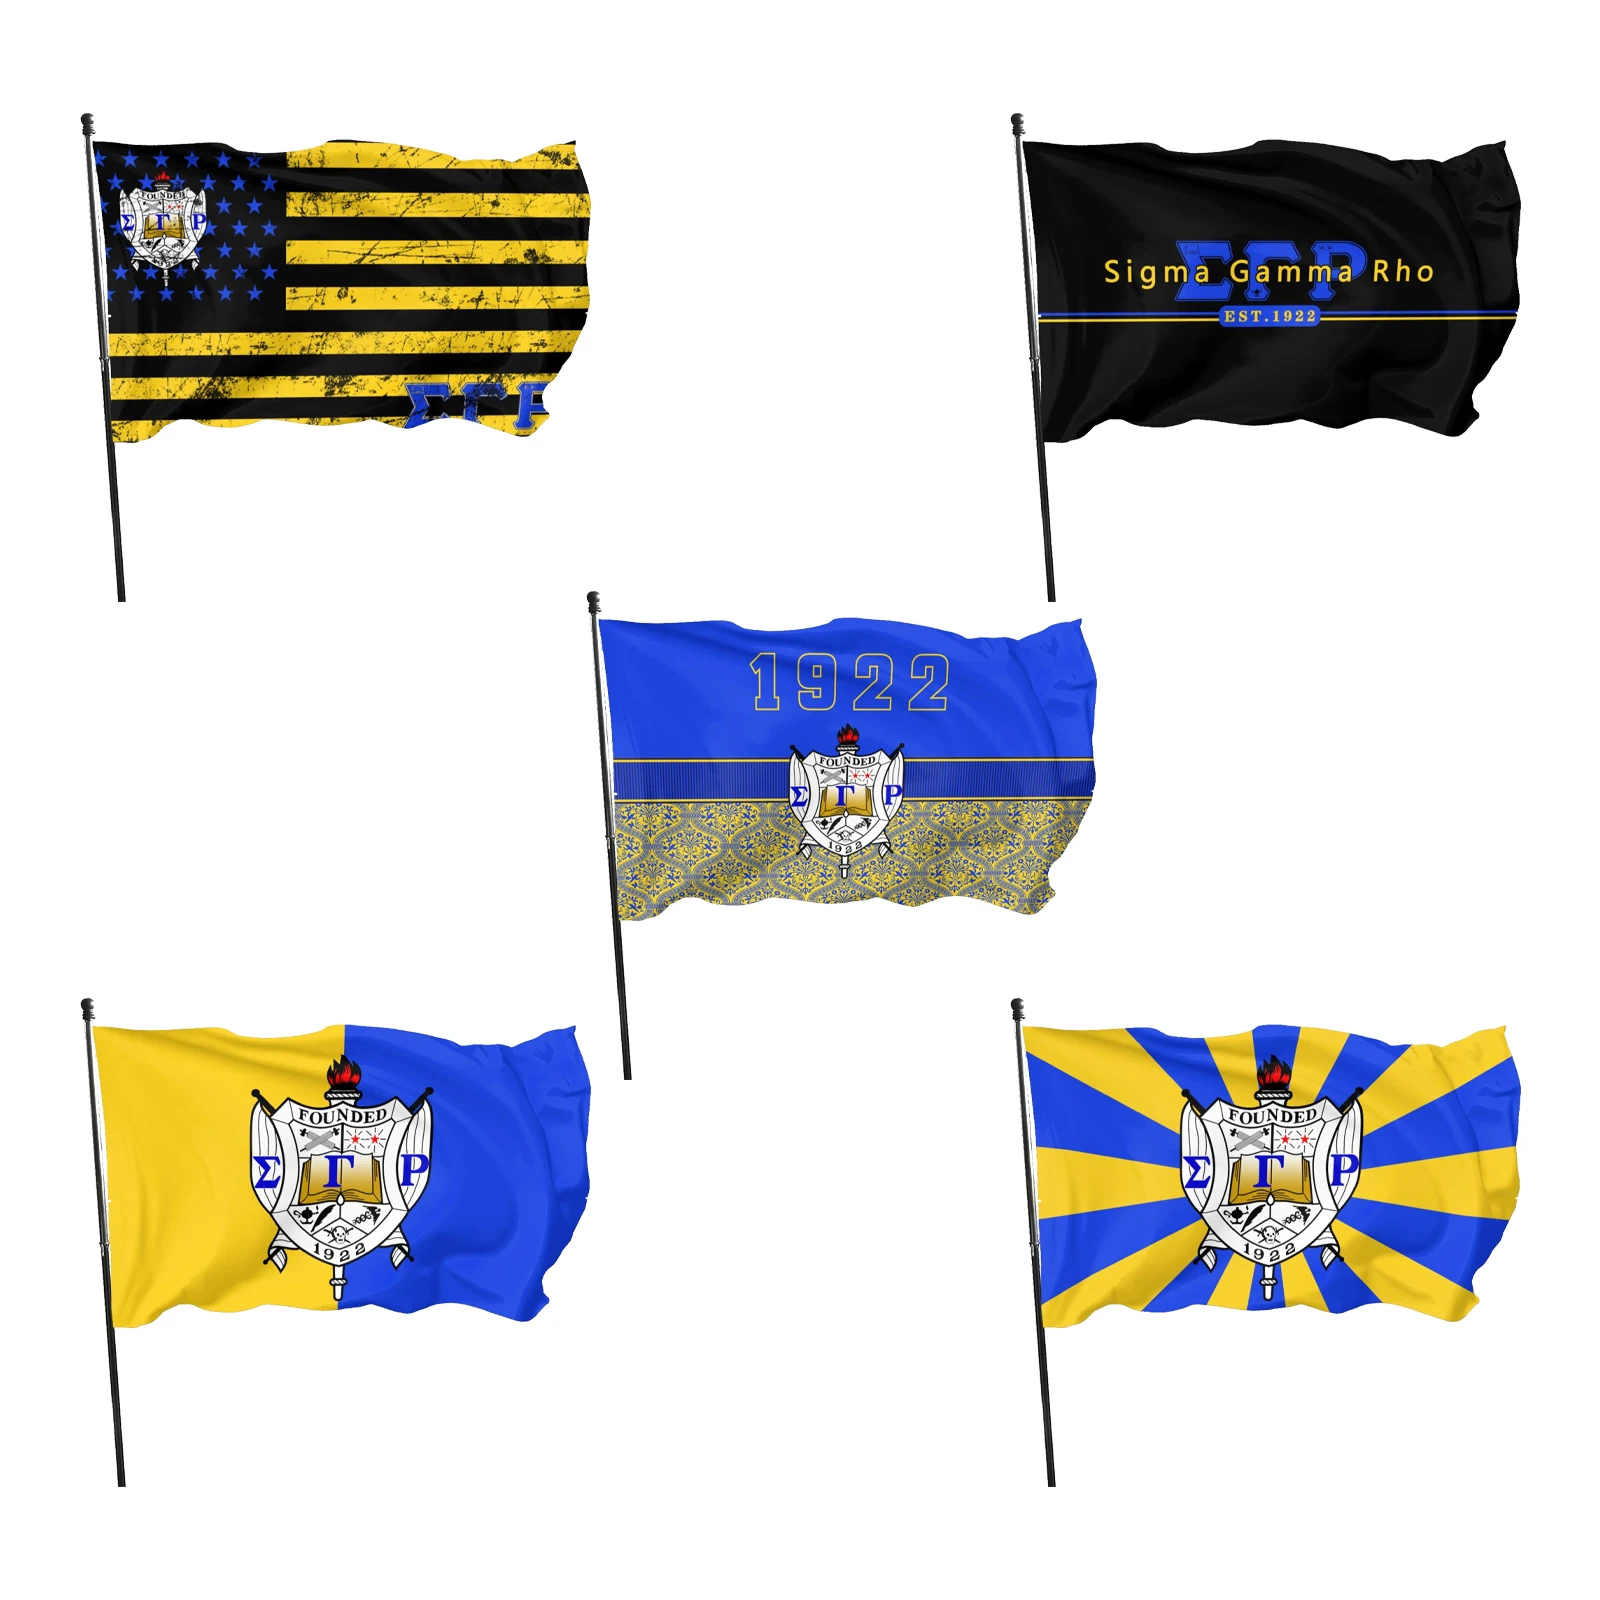 Sigma Gamma Rho 1922 SGR Flag for Home Party Garden Indoor Outdoor Flags Decoration Banner